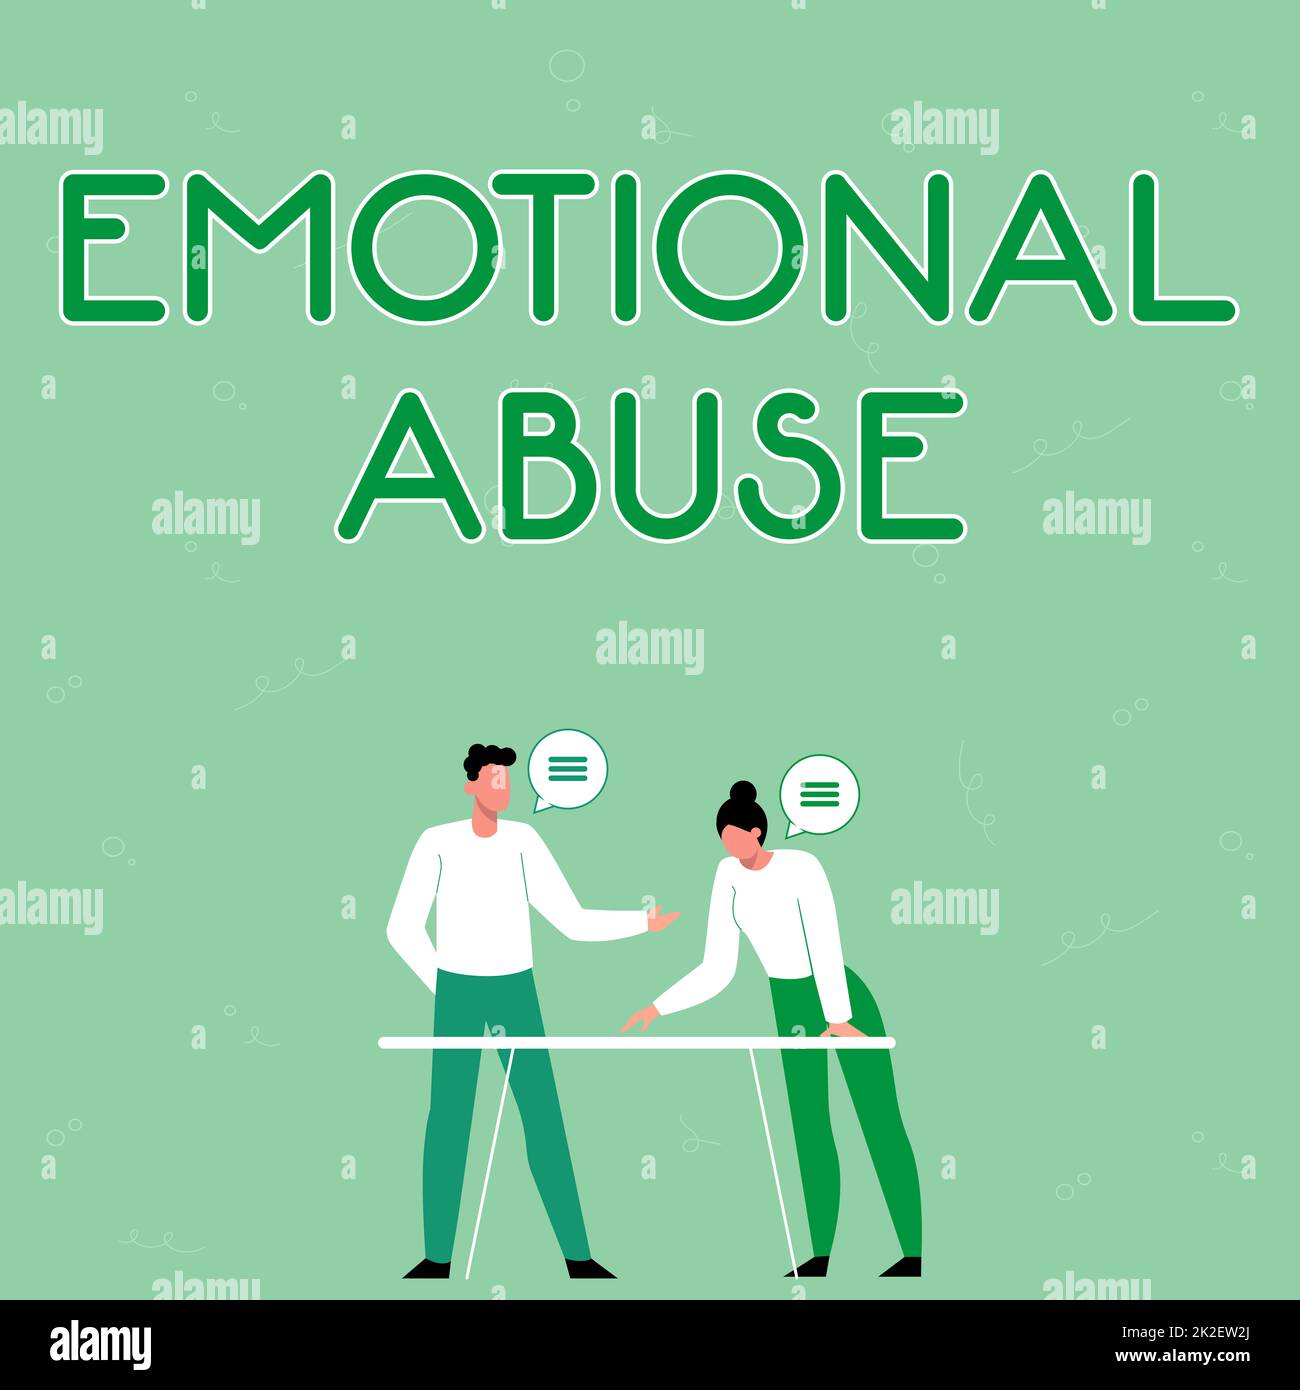 Inspiration showing sign Emotional Abuse. Business idea person subjecting or exposing another person to behavior Partners Sharing New Ideas For Skill Improvement Work Strategies. Stock Photo